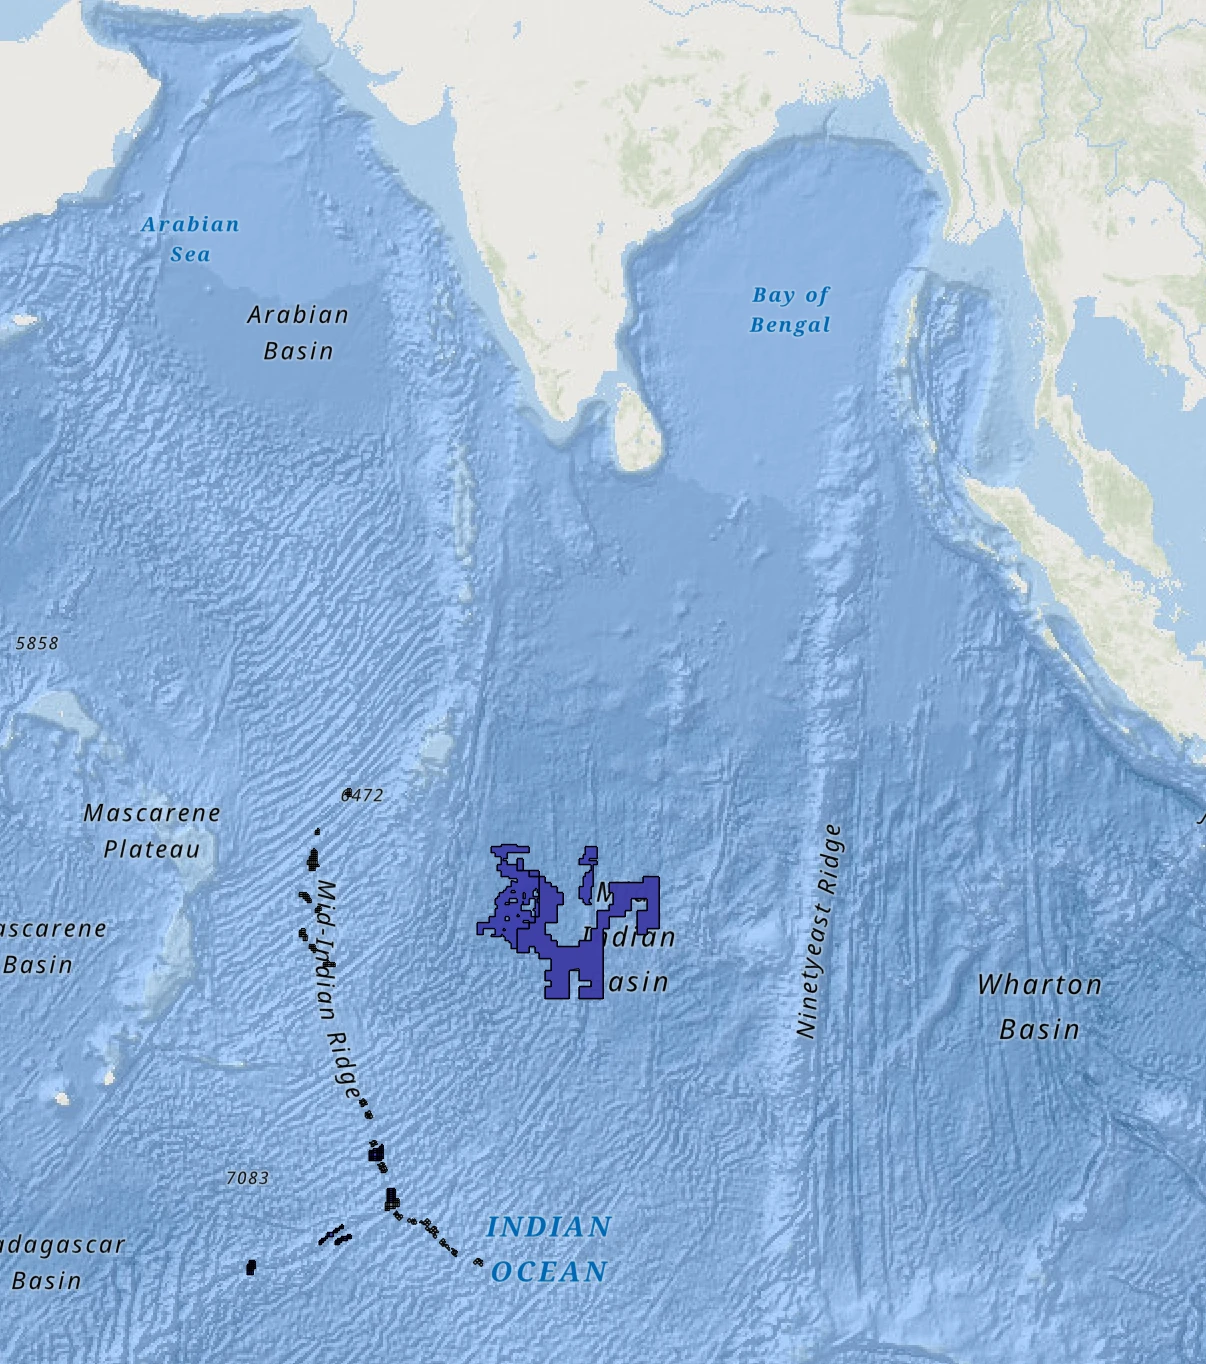 Image of Government of India Ministry of Earth Sciences licenses for seabed massive sulphides and polymetallic nodules in the Indian Ocean